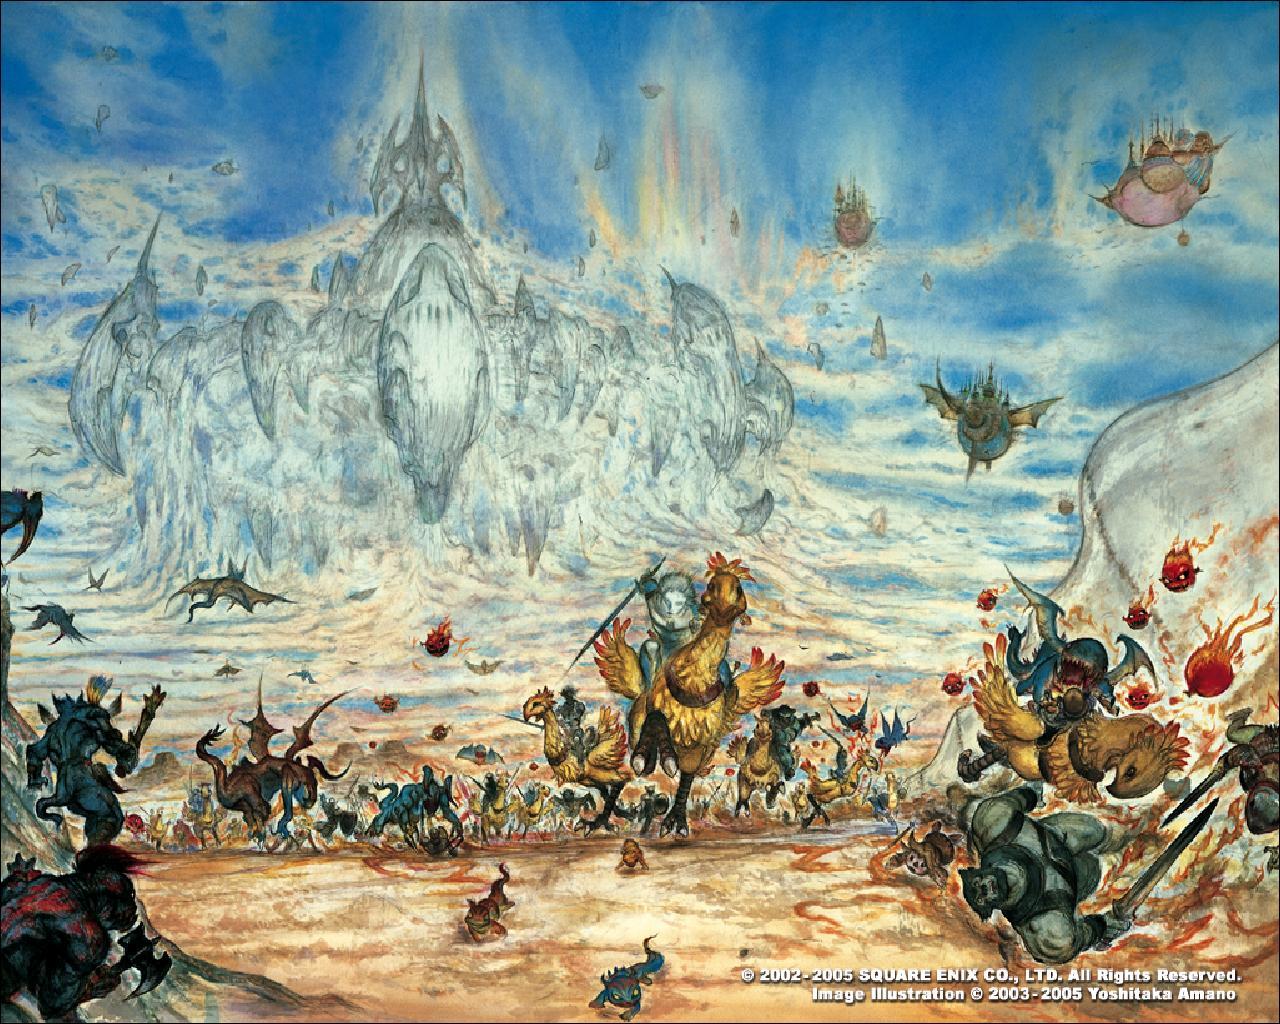 Ffxi Wallpapers Top Free Ffxi Backgrounds Wallpaperaccess